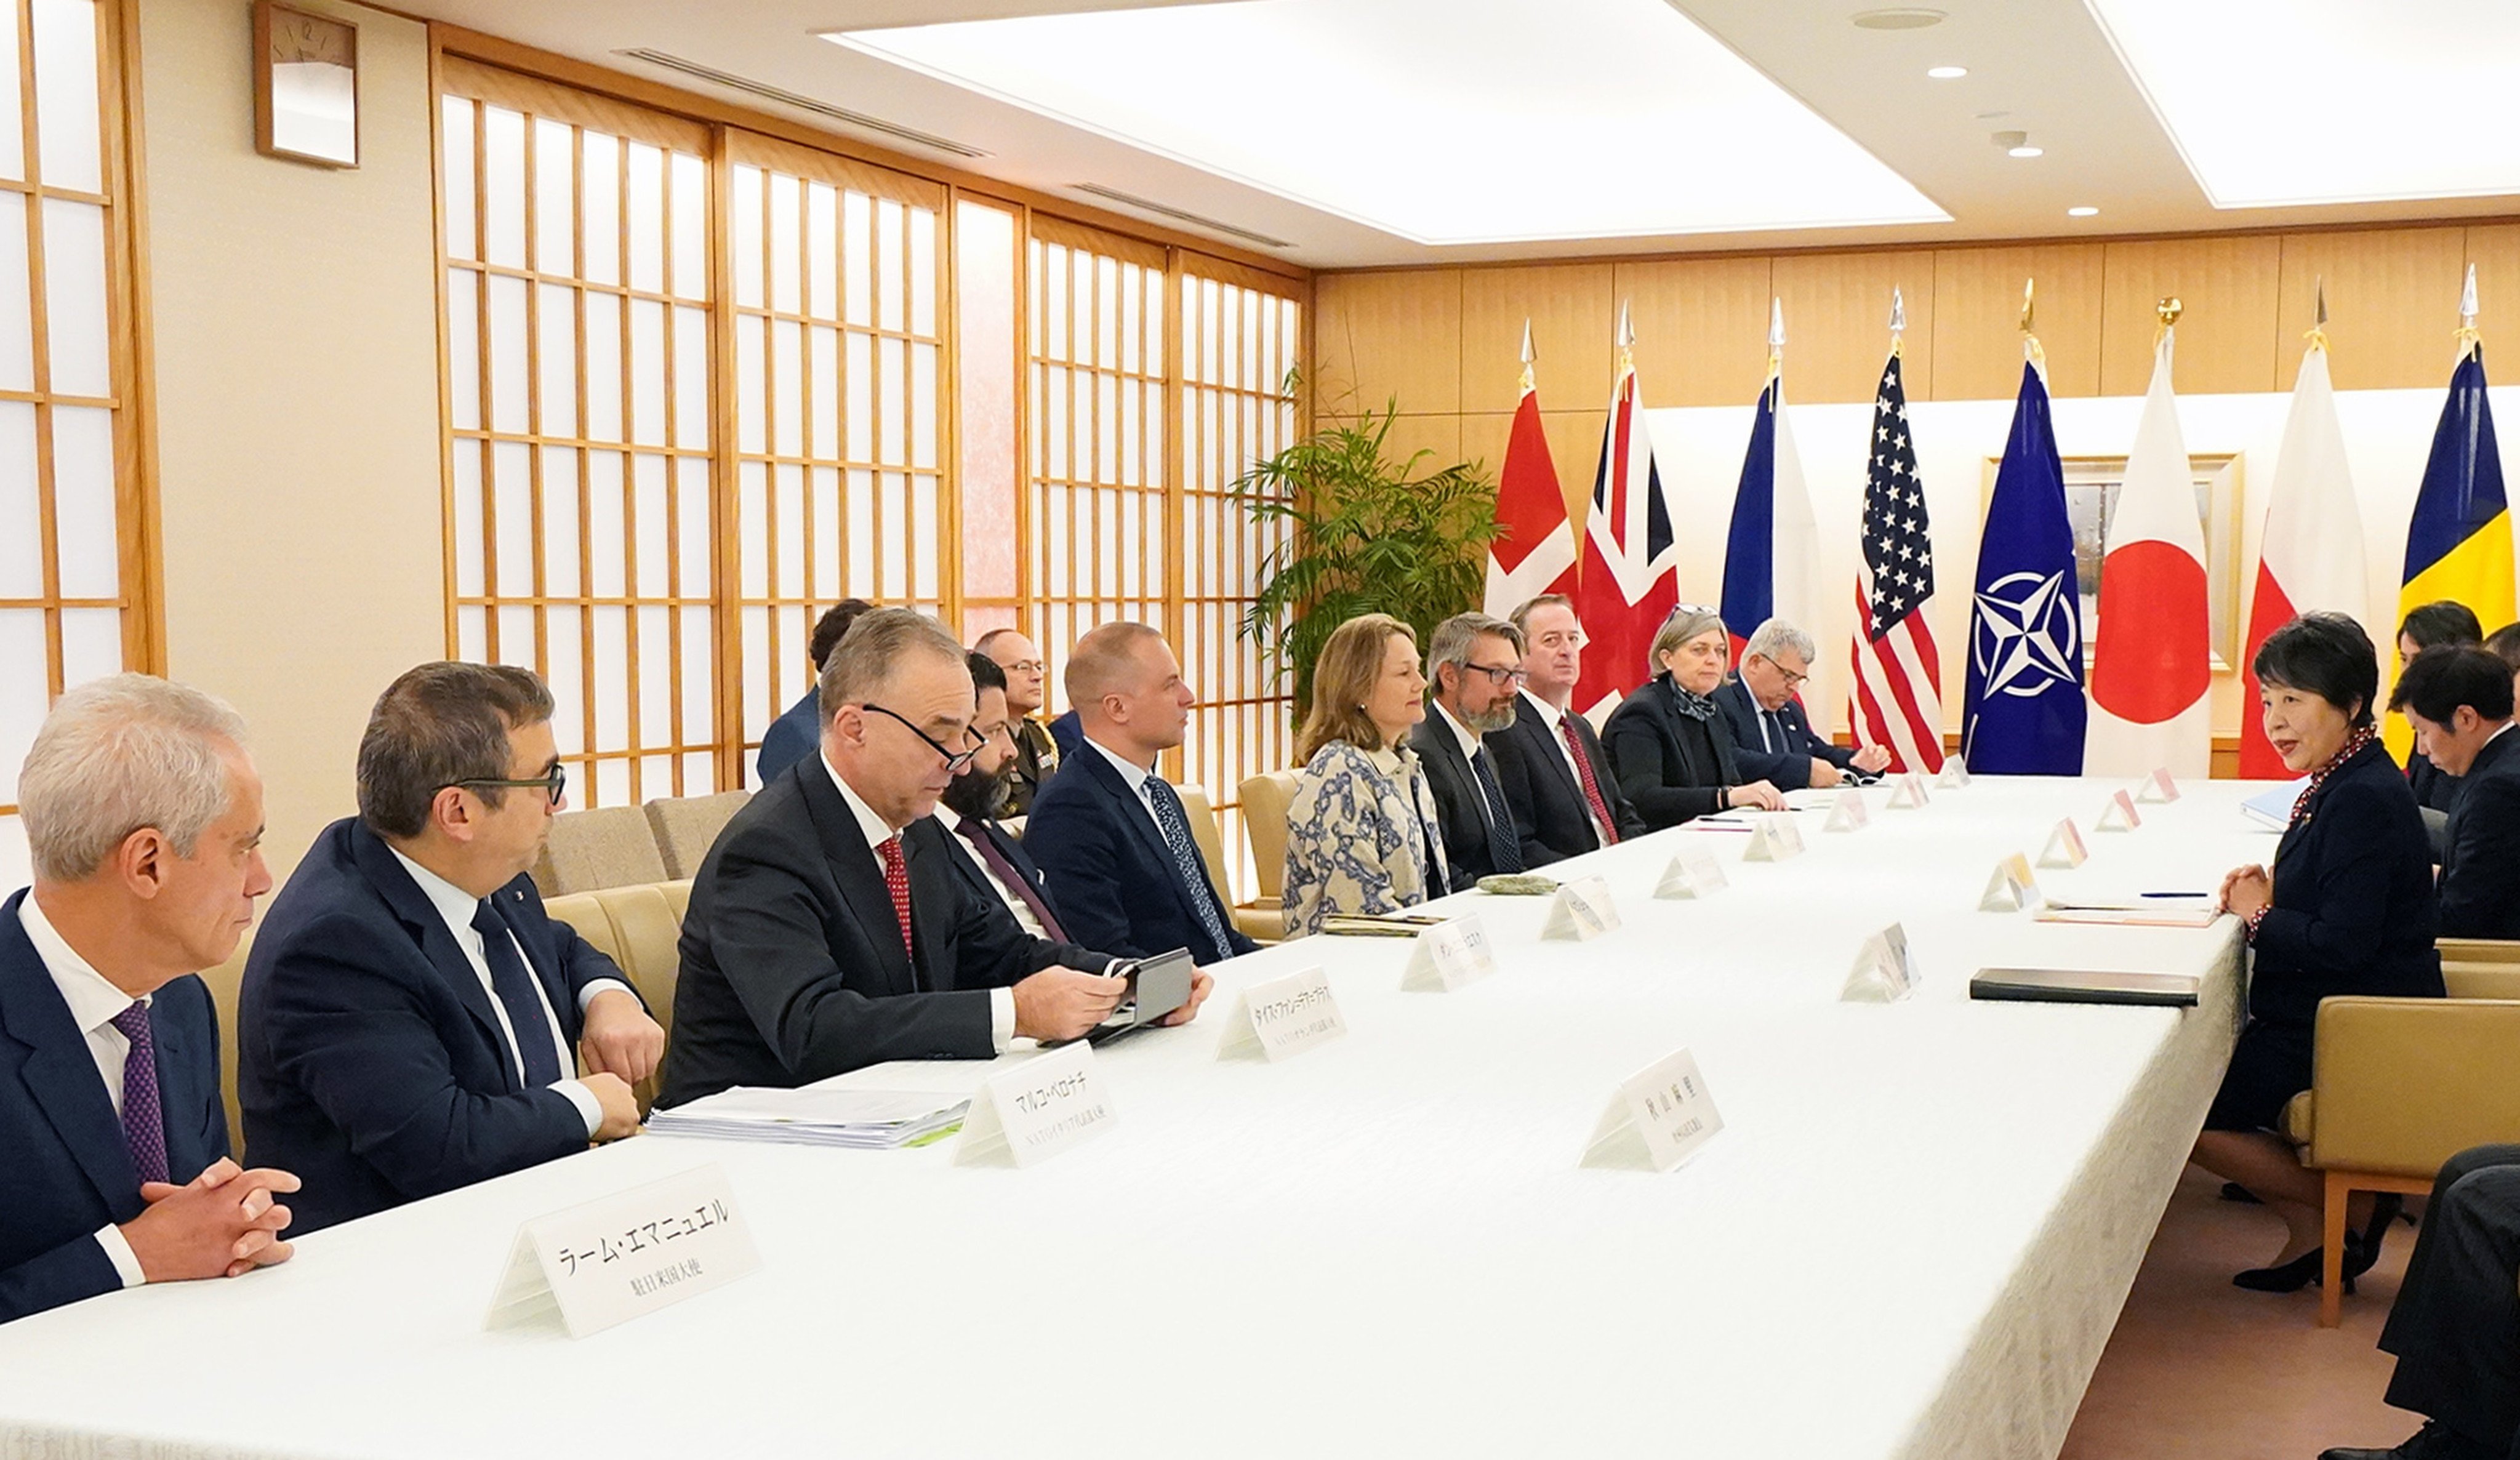 On December 11, the ambassadors from eight Nato countries met Japanese foreign minister Yoko Kamikawa. A statement said the Nato delegation believed “the deepening of the Japan-Nato cooperation is natural”.  Photo: Facebook / Ministry of Foreign Affairs of Japan